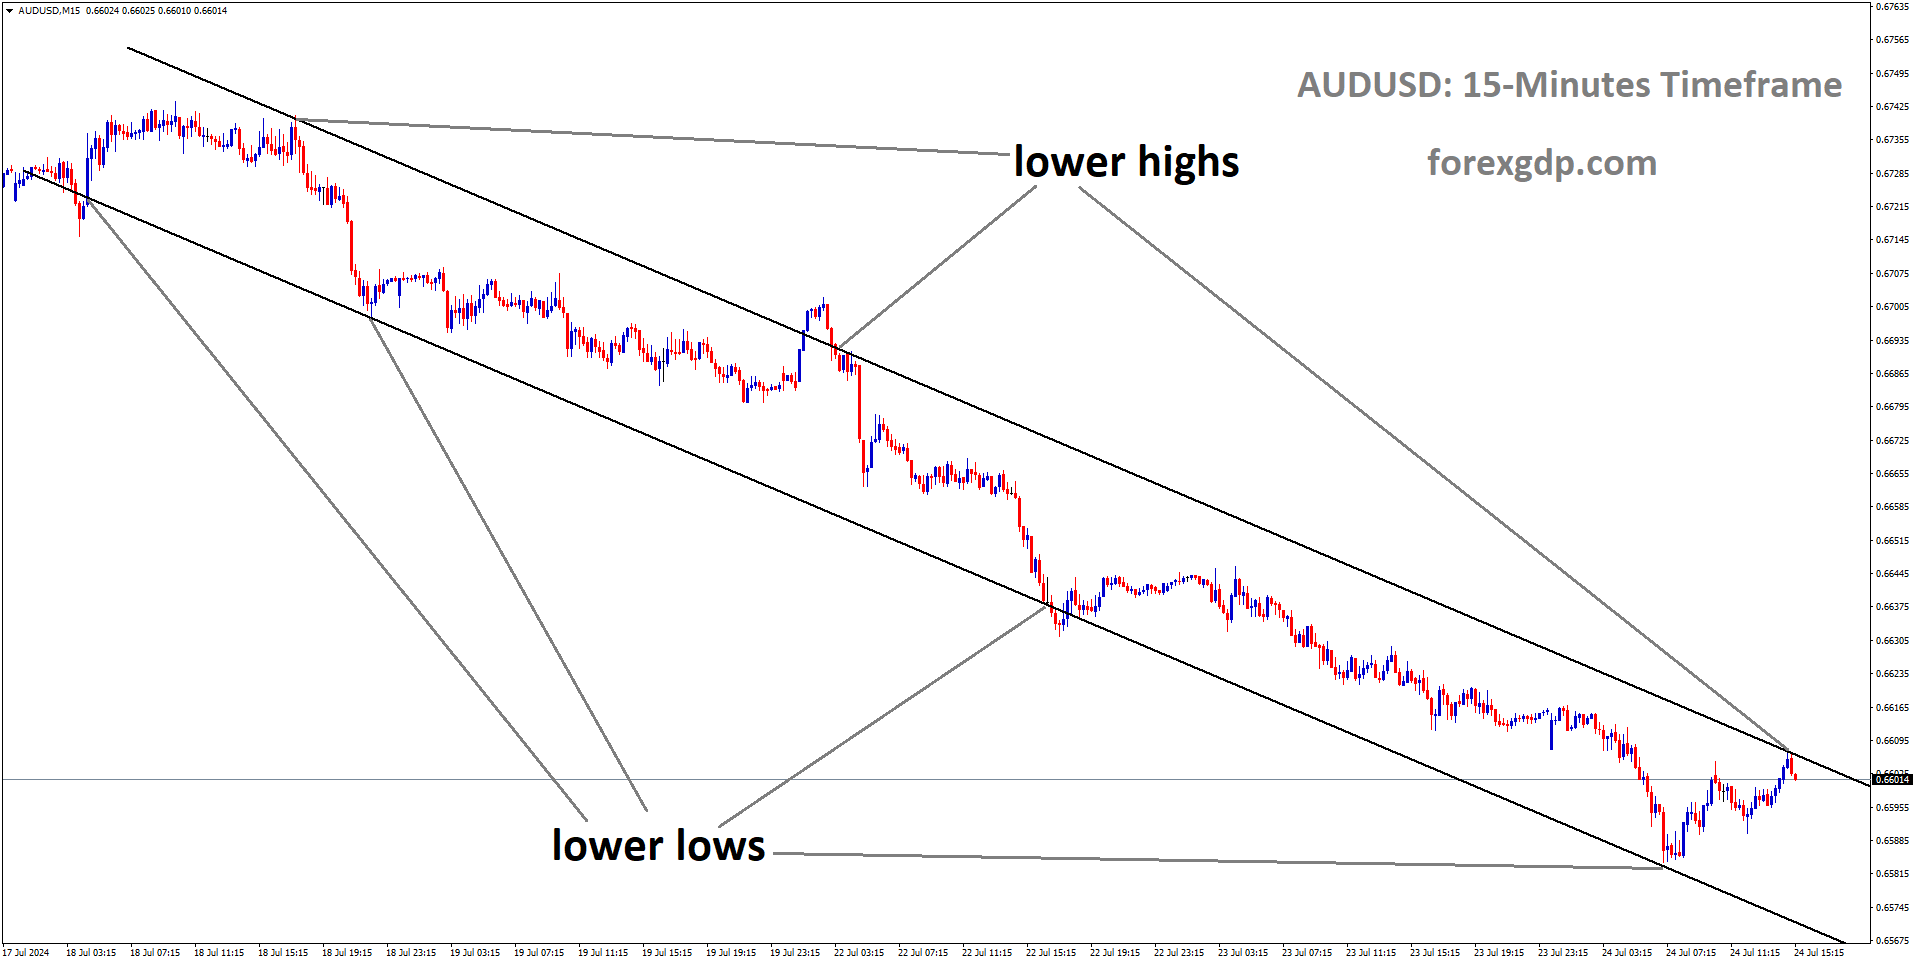 AUDUSD is moving in Descending channel and market has reached lower high area of the pattern